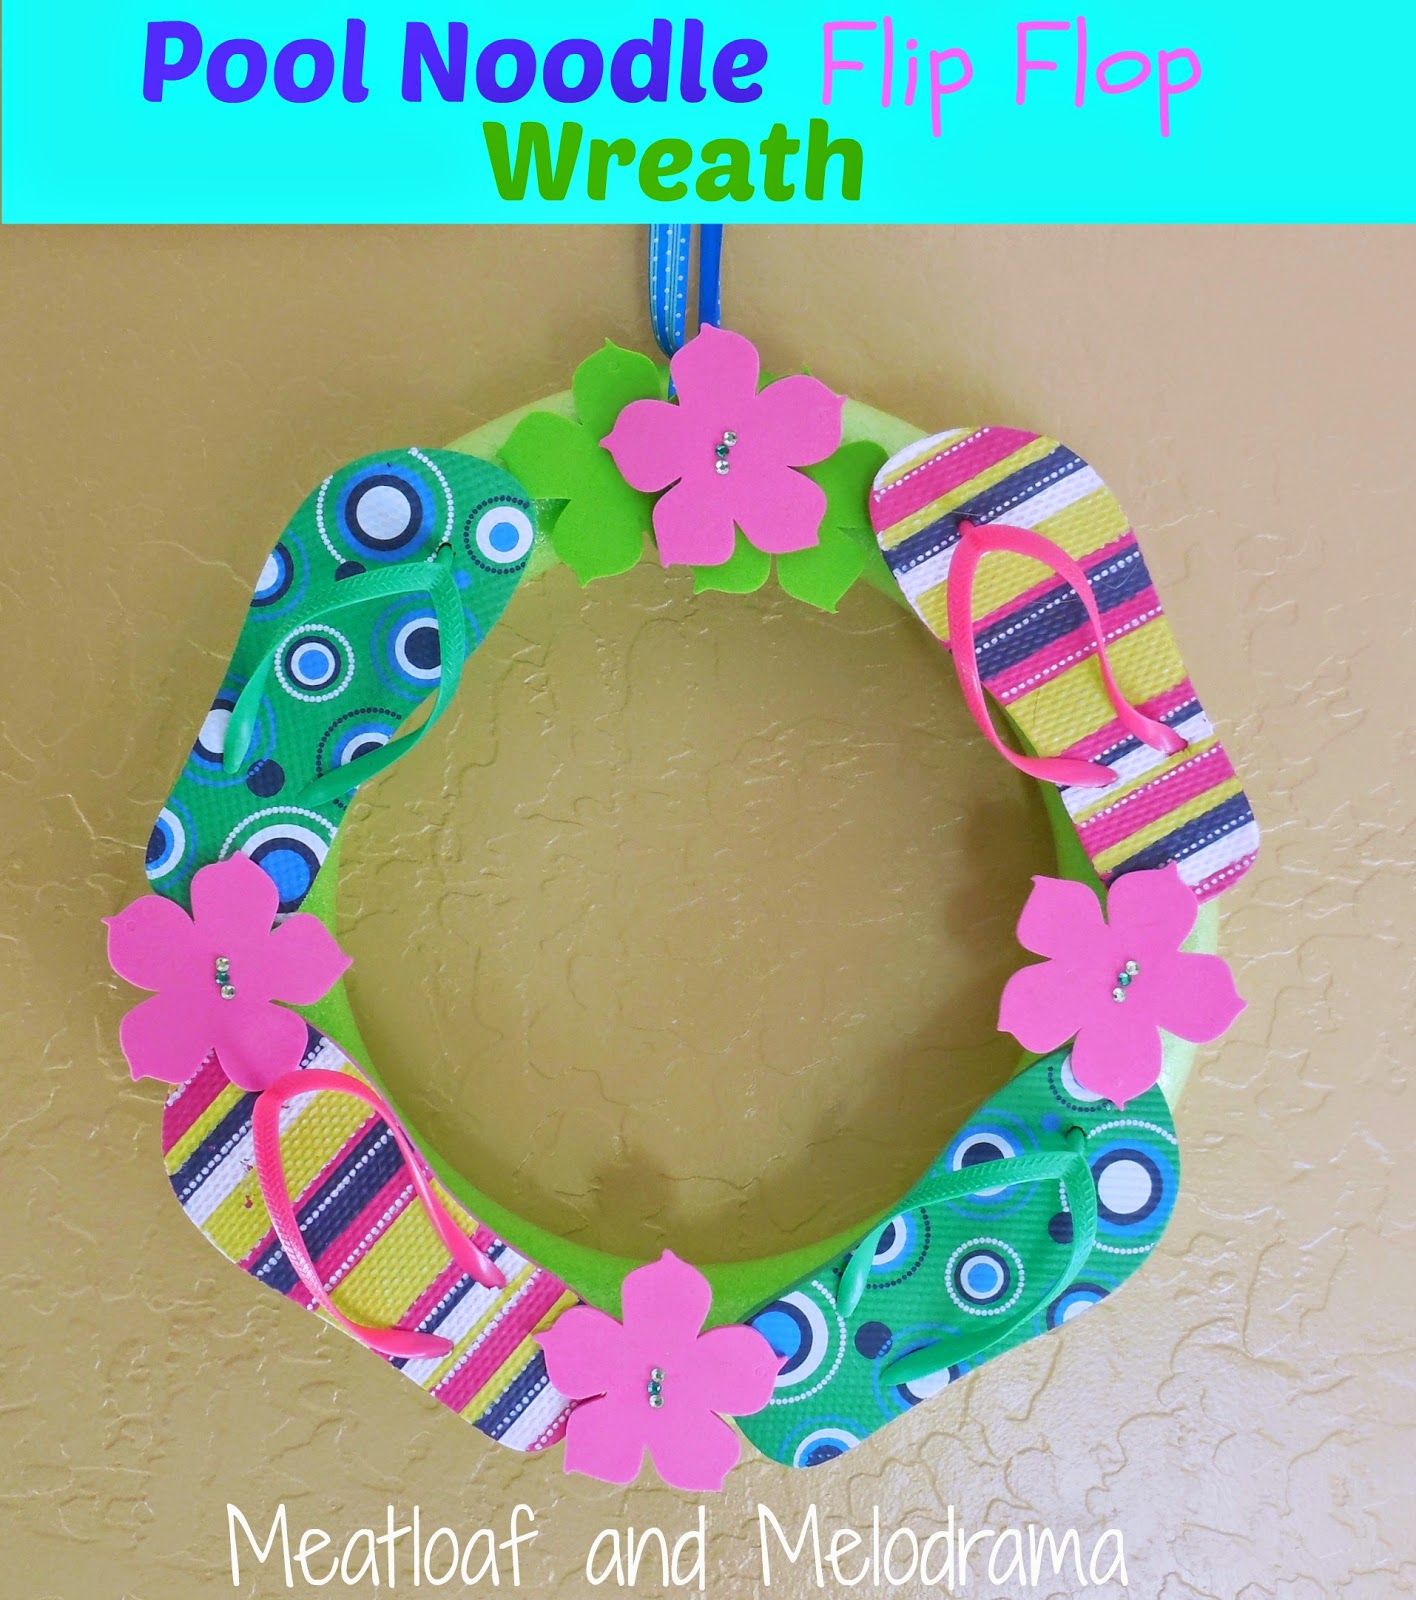 Pool noodle wreath with flip flops and foam flowers